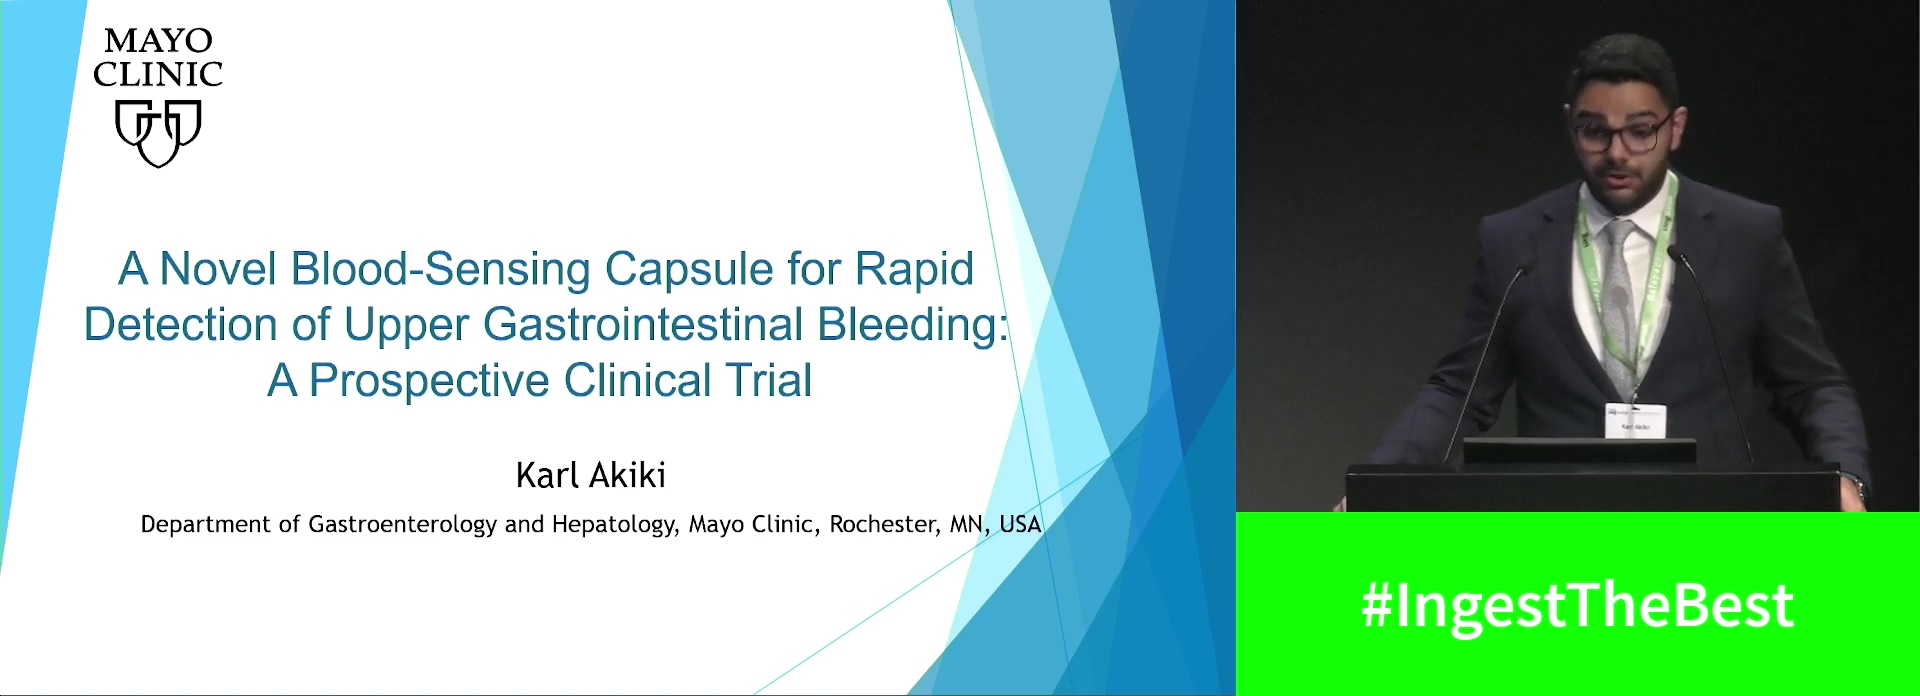 A SWALLOWED BLOOD SENSING CAPSULE FOR RAPID DETECTION OF UPPER GASTROINTESTINAL BLEEDING: FINDINGS FROM A LARGE BLINDED PROSPECTIVE CLINICAL TRIAL